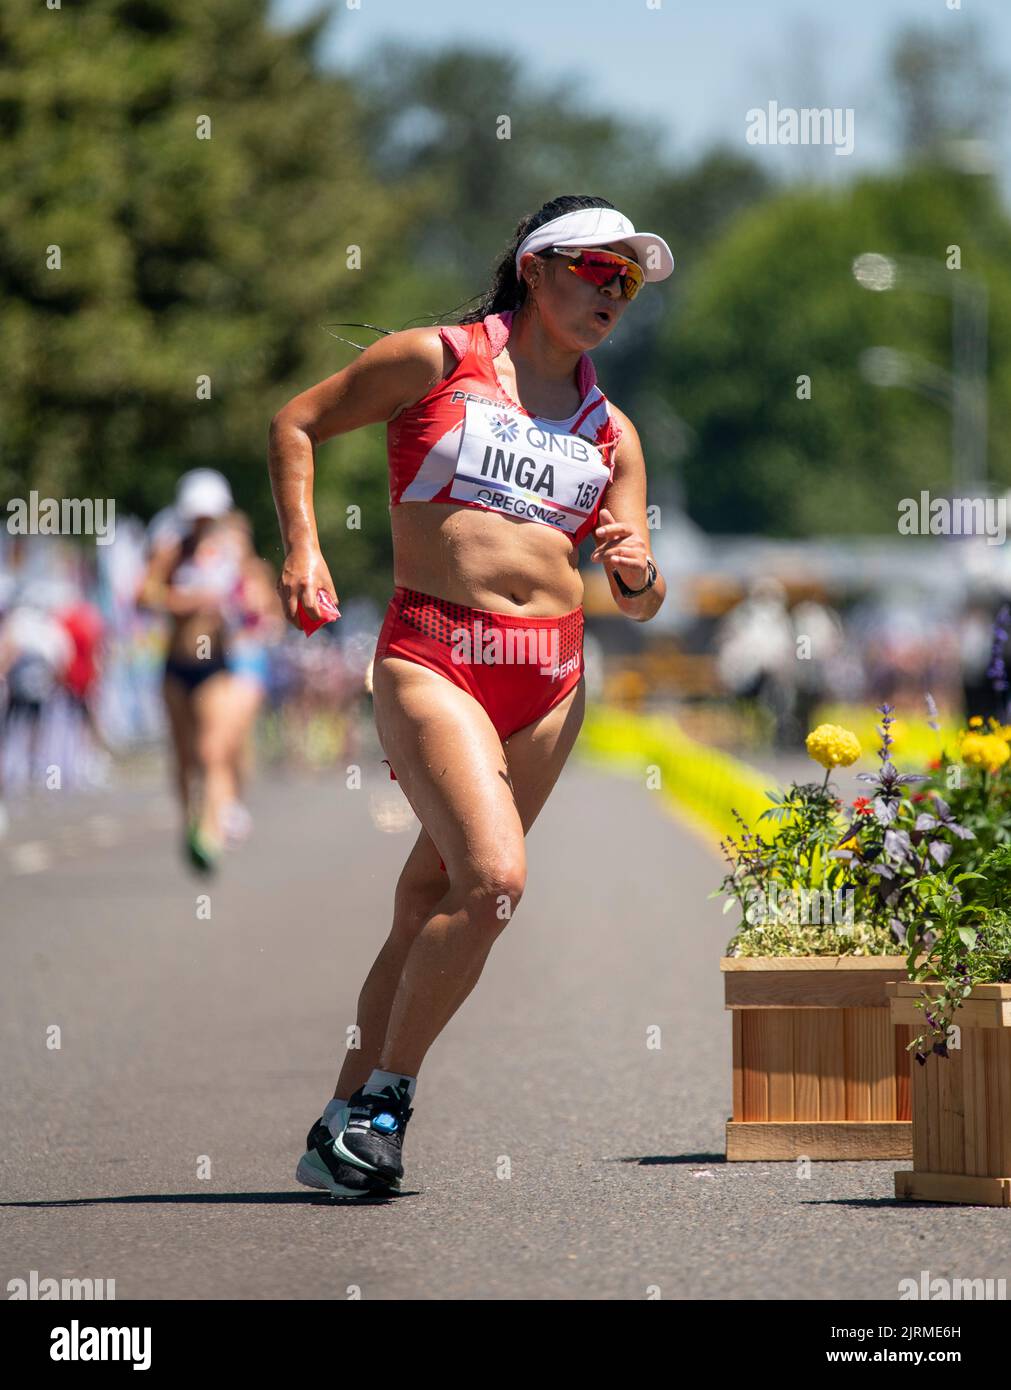 Evelyn Inga of Peru competing in the women’s 20k walk at the World Athletics Championships, Hayward Field, Eugene, Oregon USA on the 15th July 2022. P Stock Photo